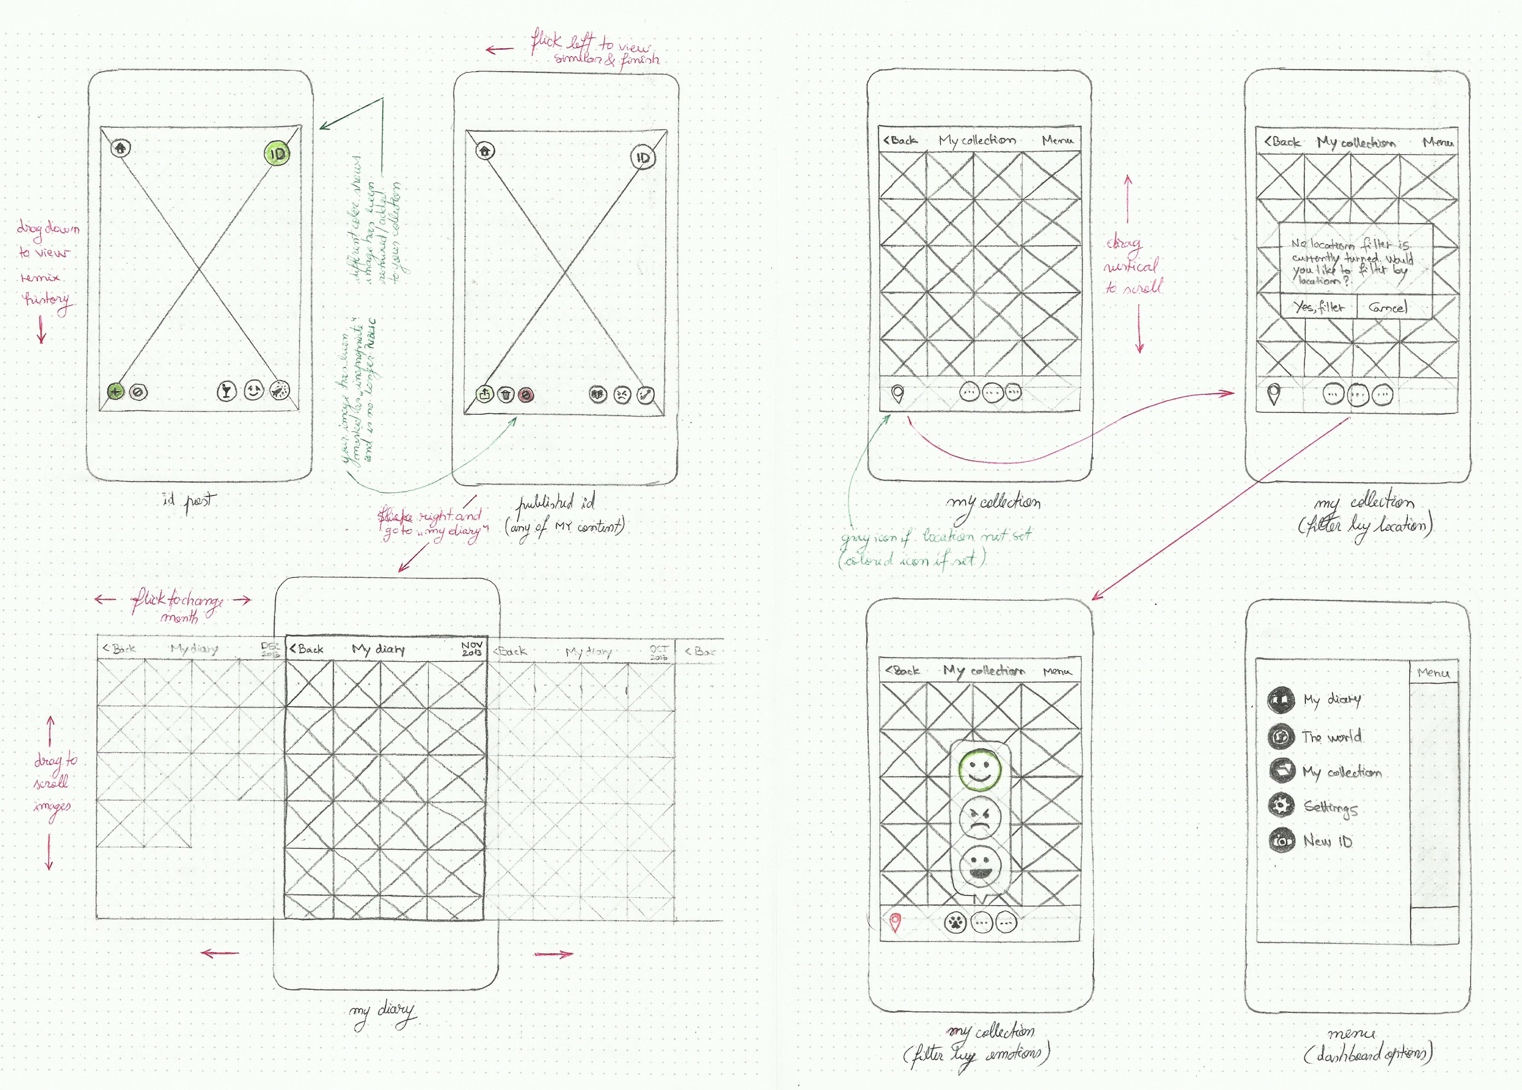 Early mock sketches of Sideview app